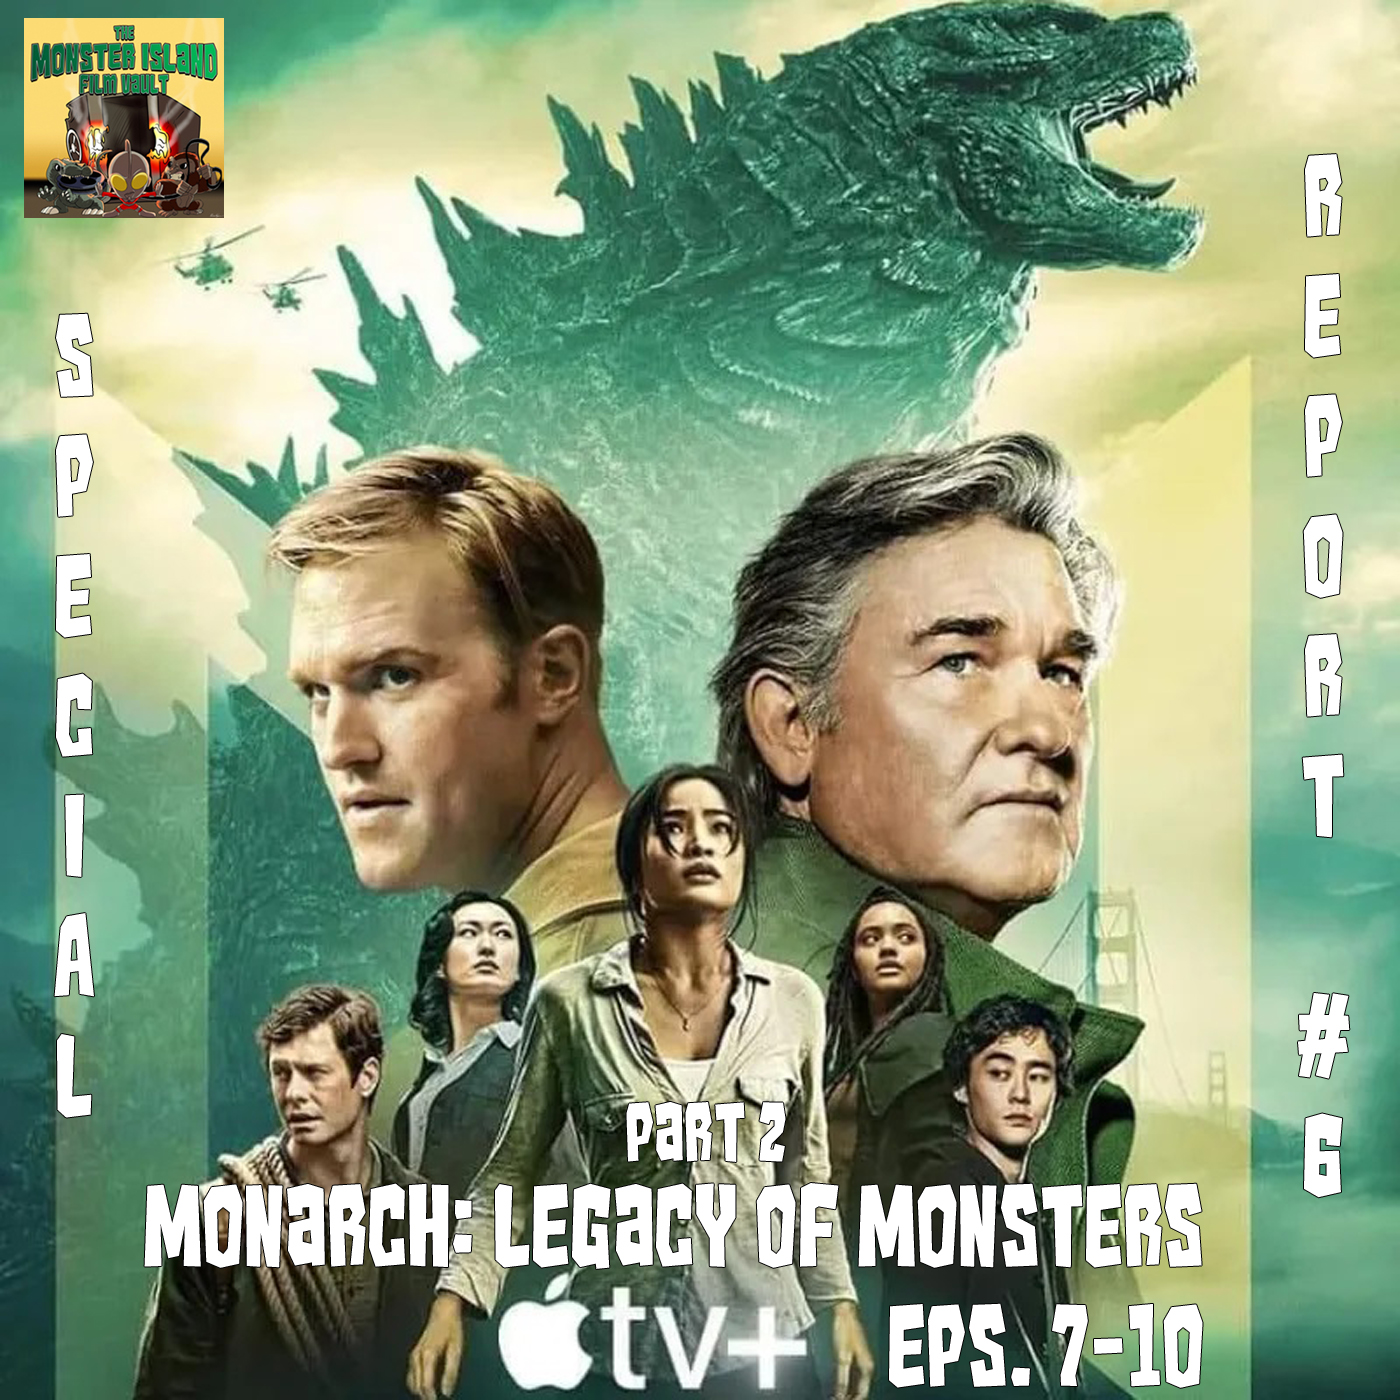 Special Report #6, Part 2 – Monarch: Legacy of Monsters (Eps. 7-10 & Final Thoughts)